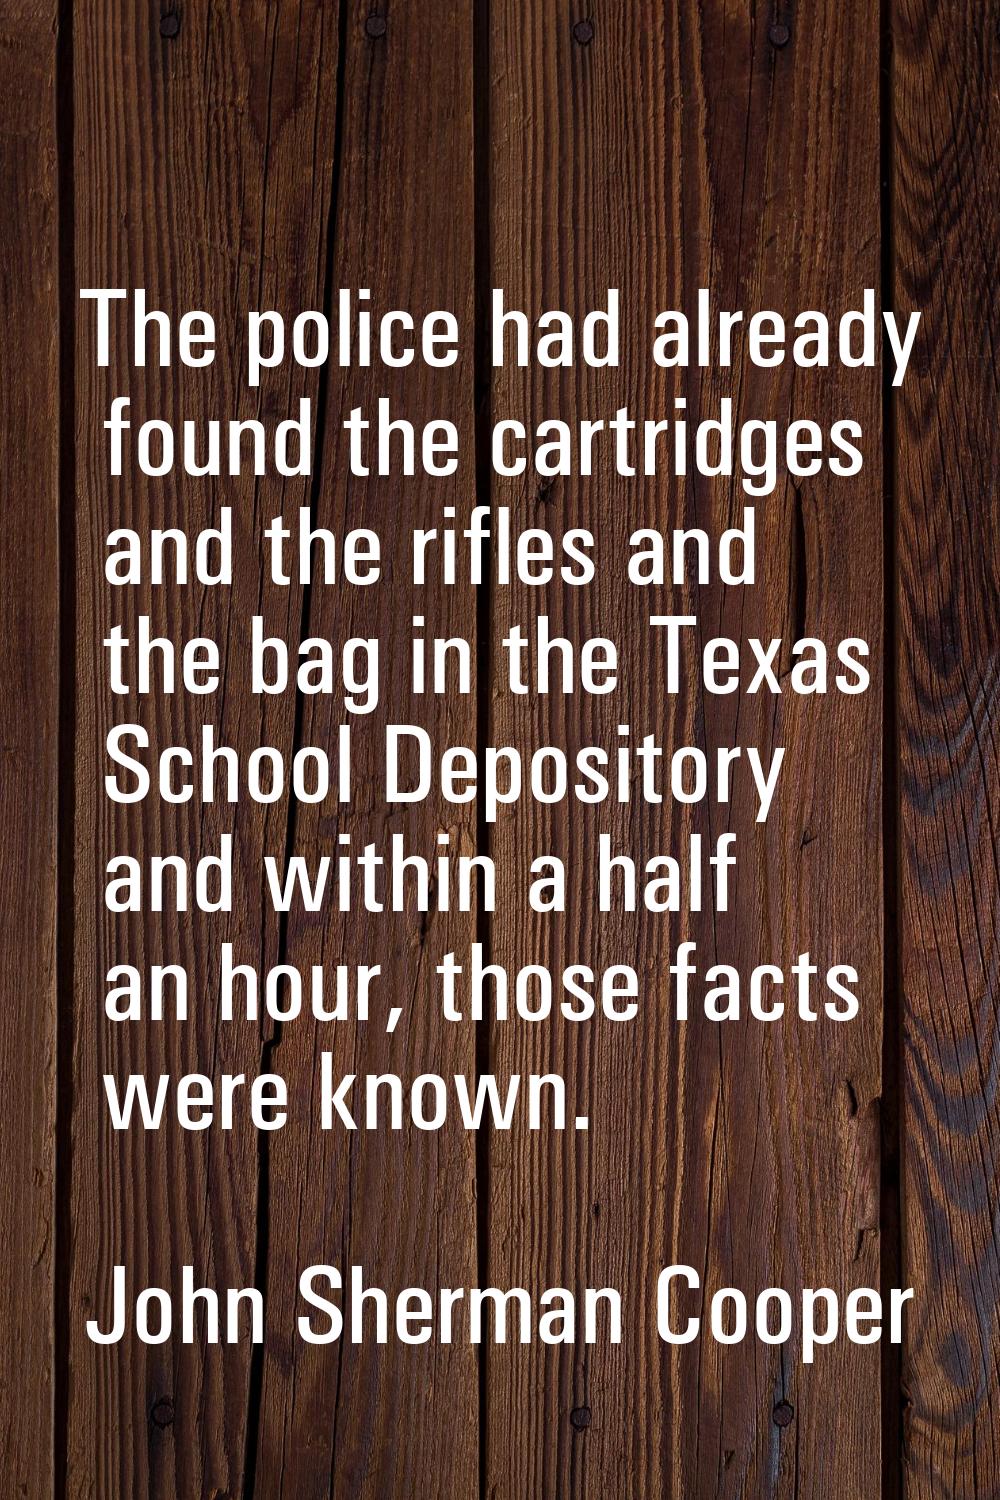 The police had already found the cartridges and the rifles and the bag in the Texas School Deposito